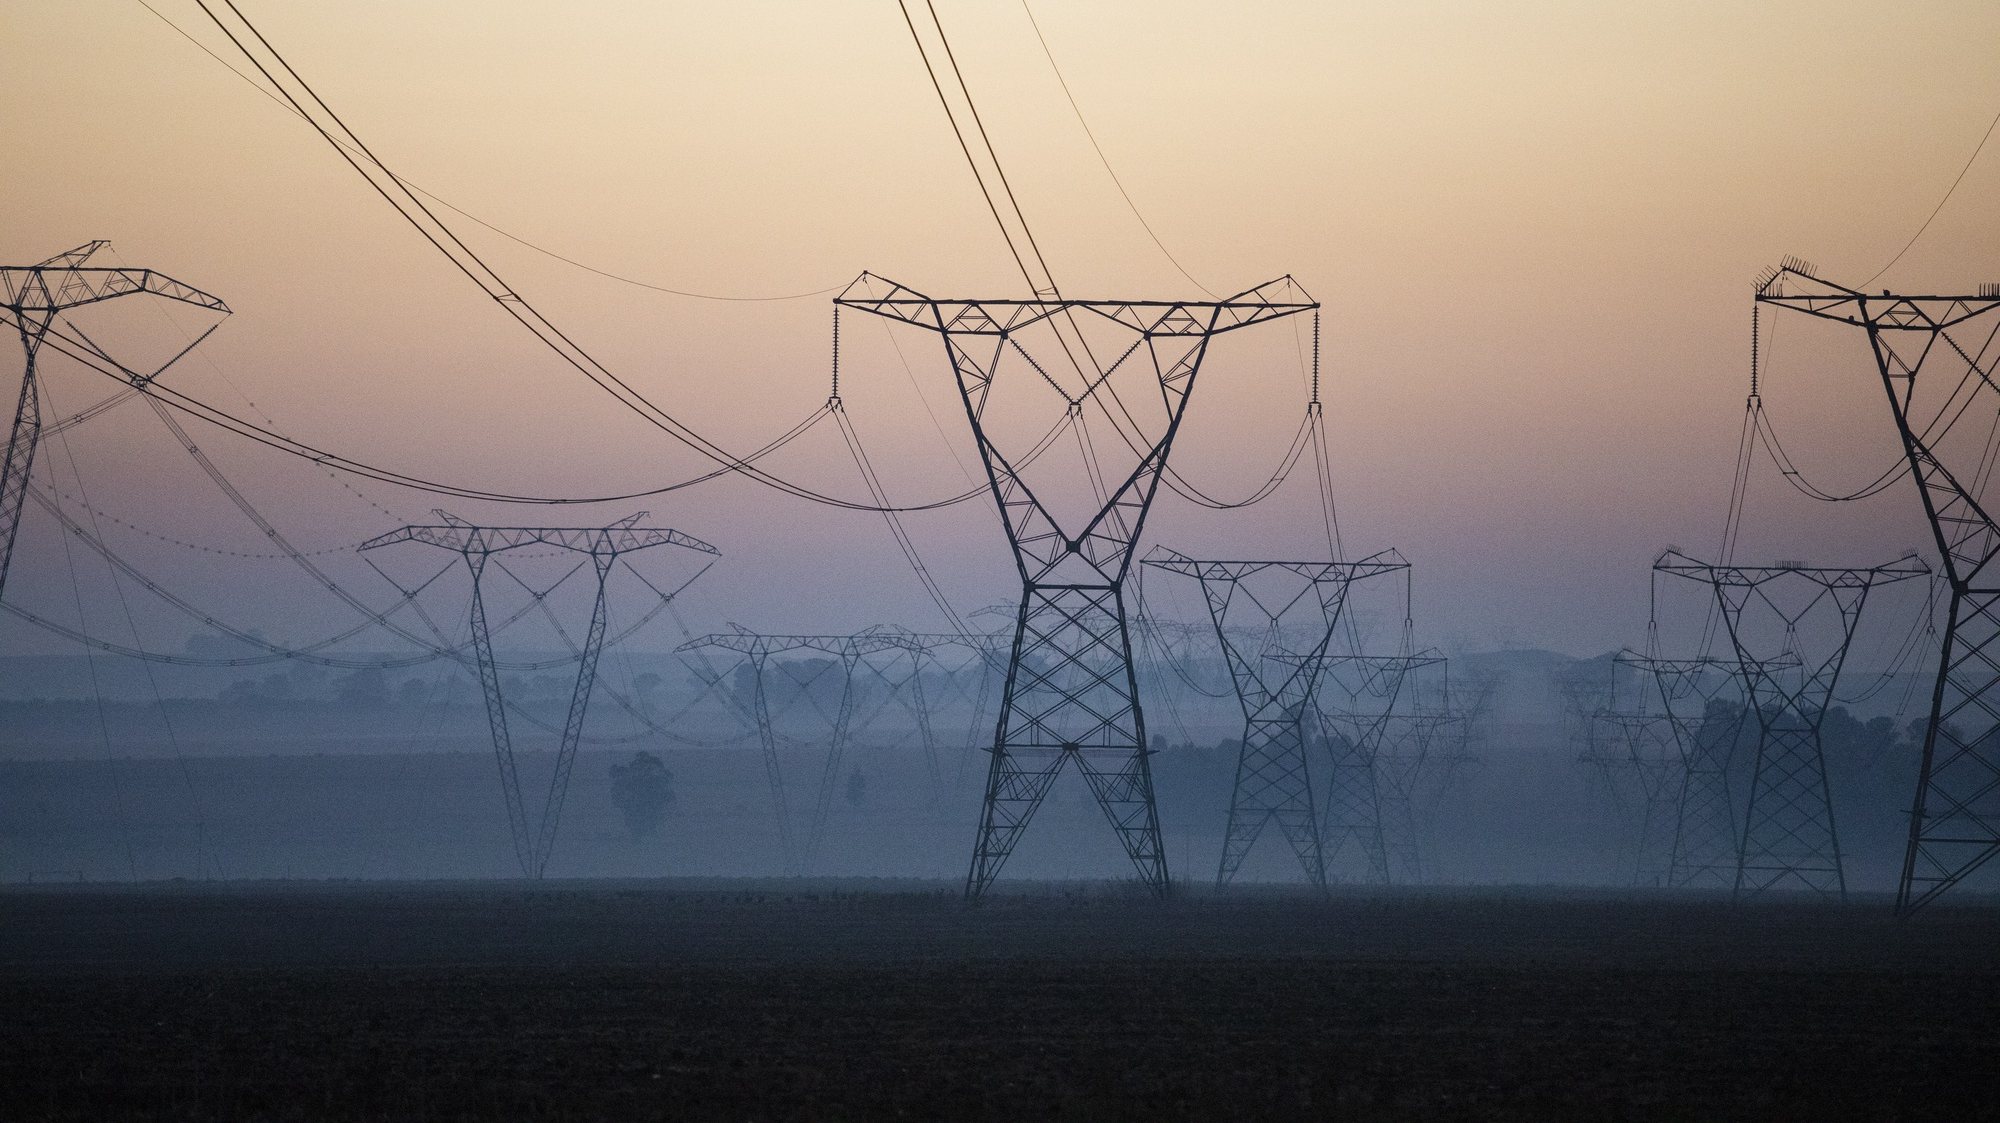 epa07800621 Power lines run from one of Eskom&#039;s coal fired power stations near Villiers, South Africa, 29 August 2019. The national power supplier is considering selling coal power stations to help settle Eskom&#039;s massive debt-burden.
In a document released by Treasury the government should sell Eskom&#039;s coal-fired power stations, possibly through a series of auctions, which could earn the state 450 billions Rands (about 27 billion euros). The national power grid has been under pereasure over the past decade resulting in high prices for power and power outages.  EPA/KIM LUDBROOK